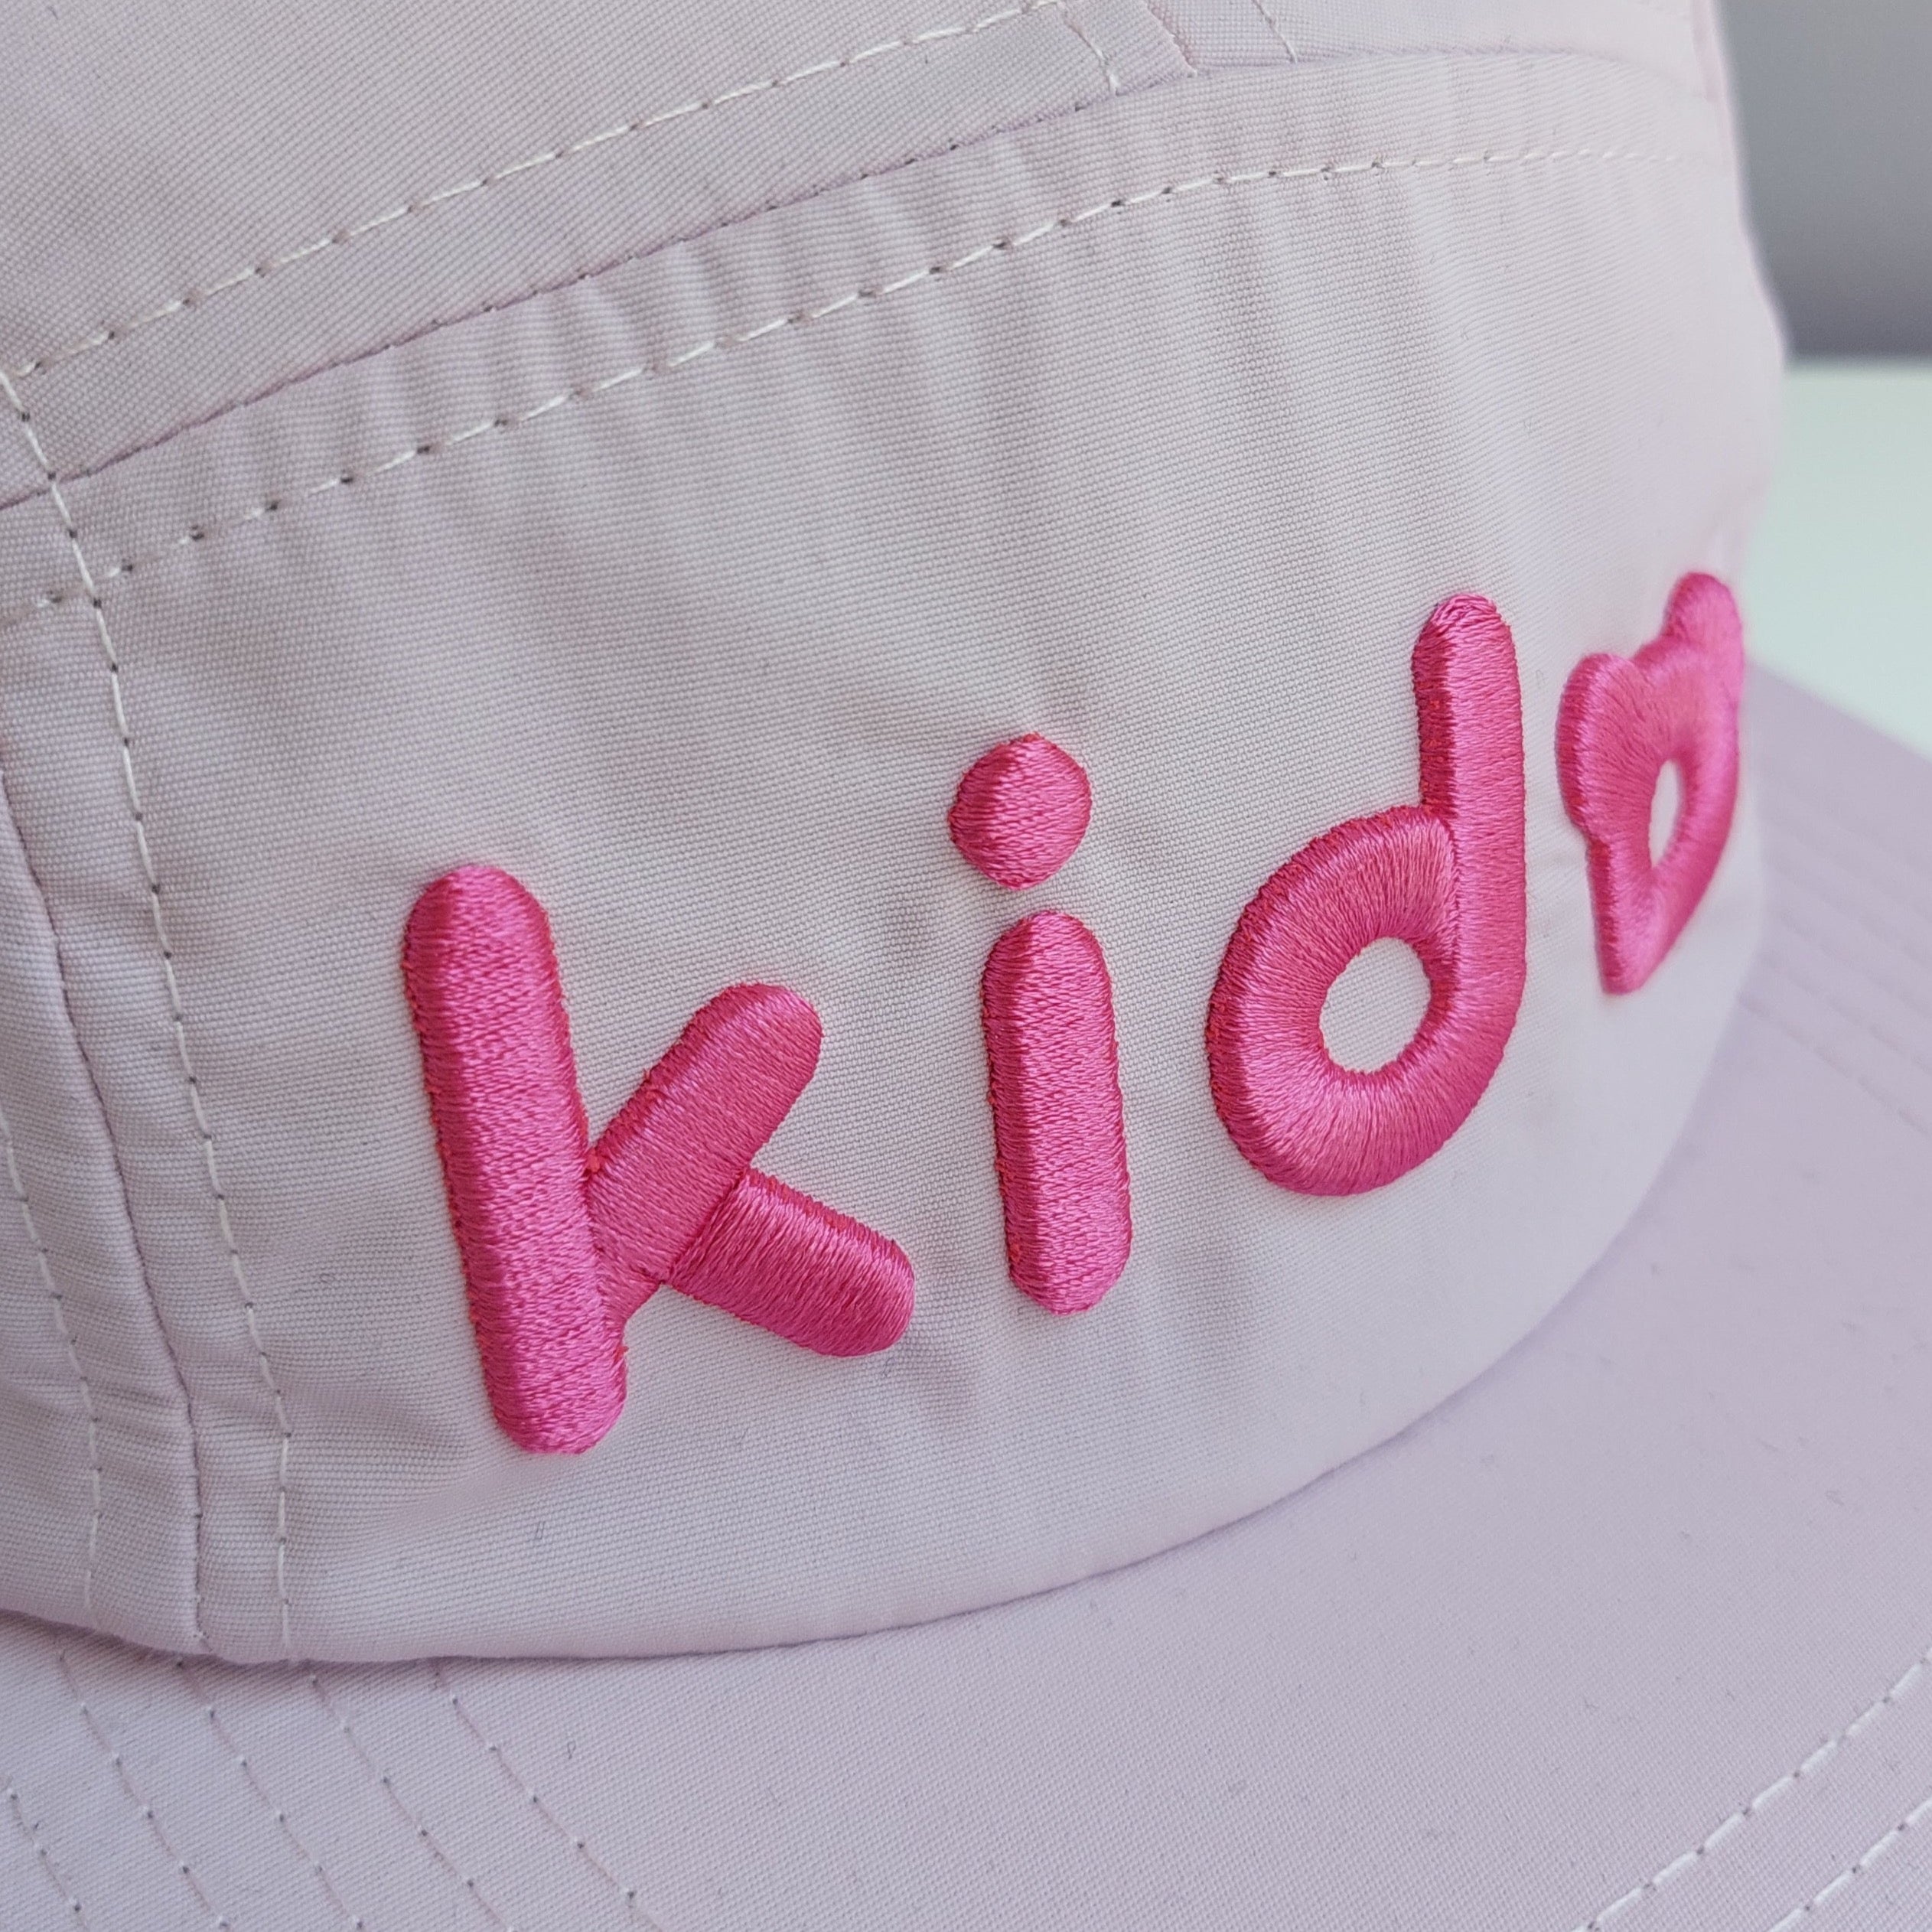 A close up of a pale pink 5 panel cap turned at a 45 degree angle sits on a white surface with a light purple background. The Kido logo is embroidered across the front in darker pink thread.